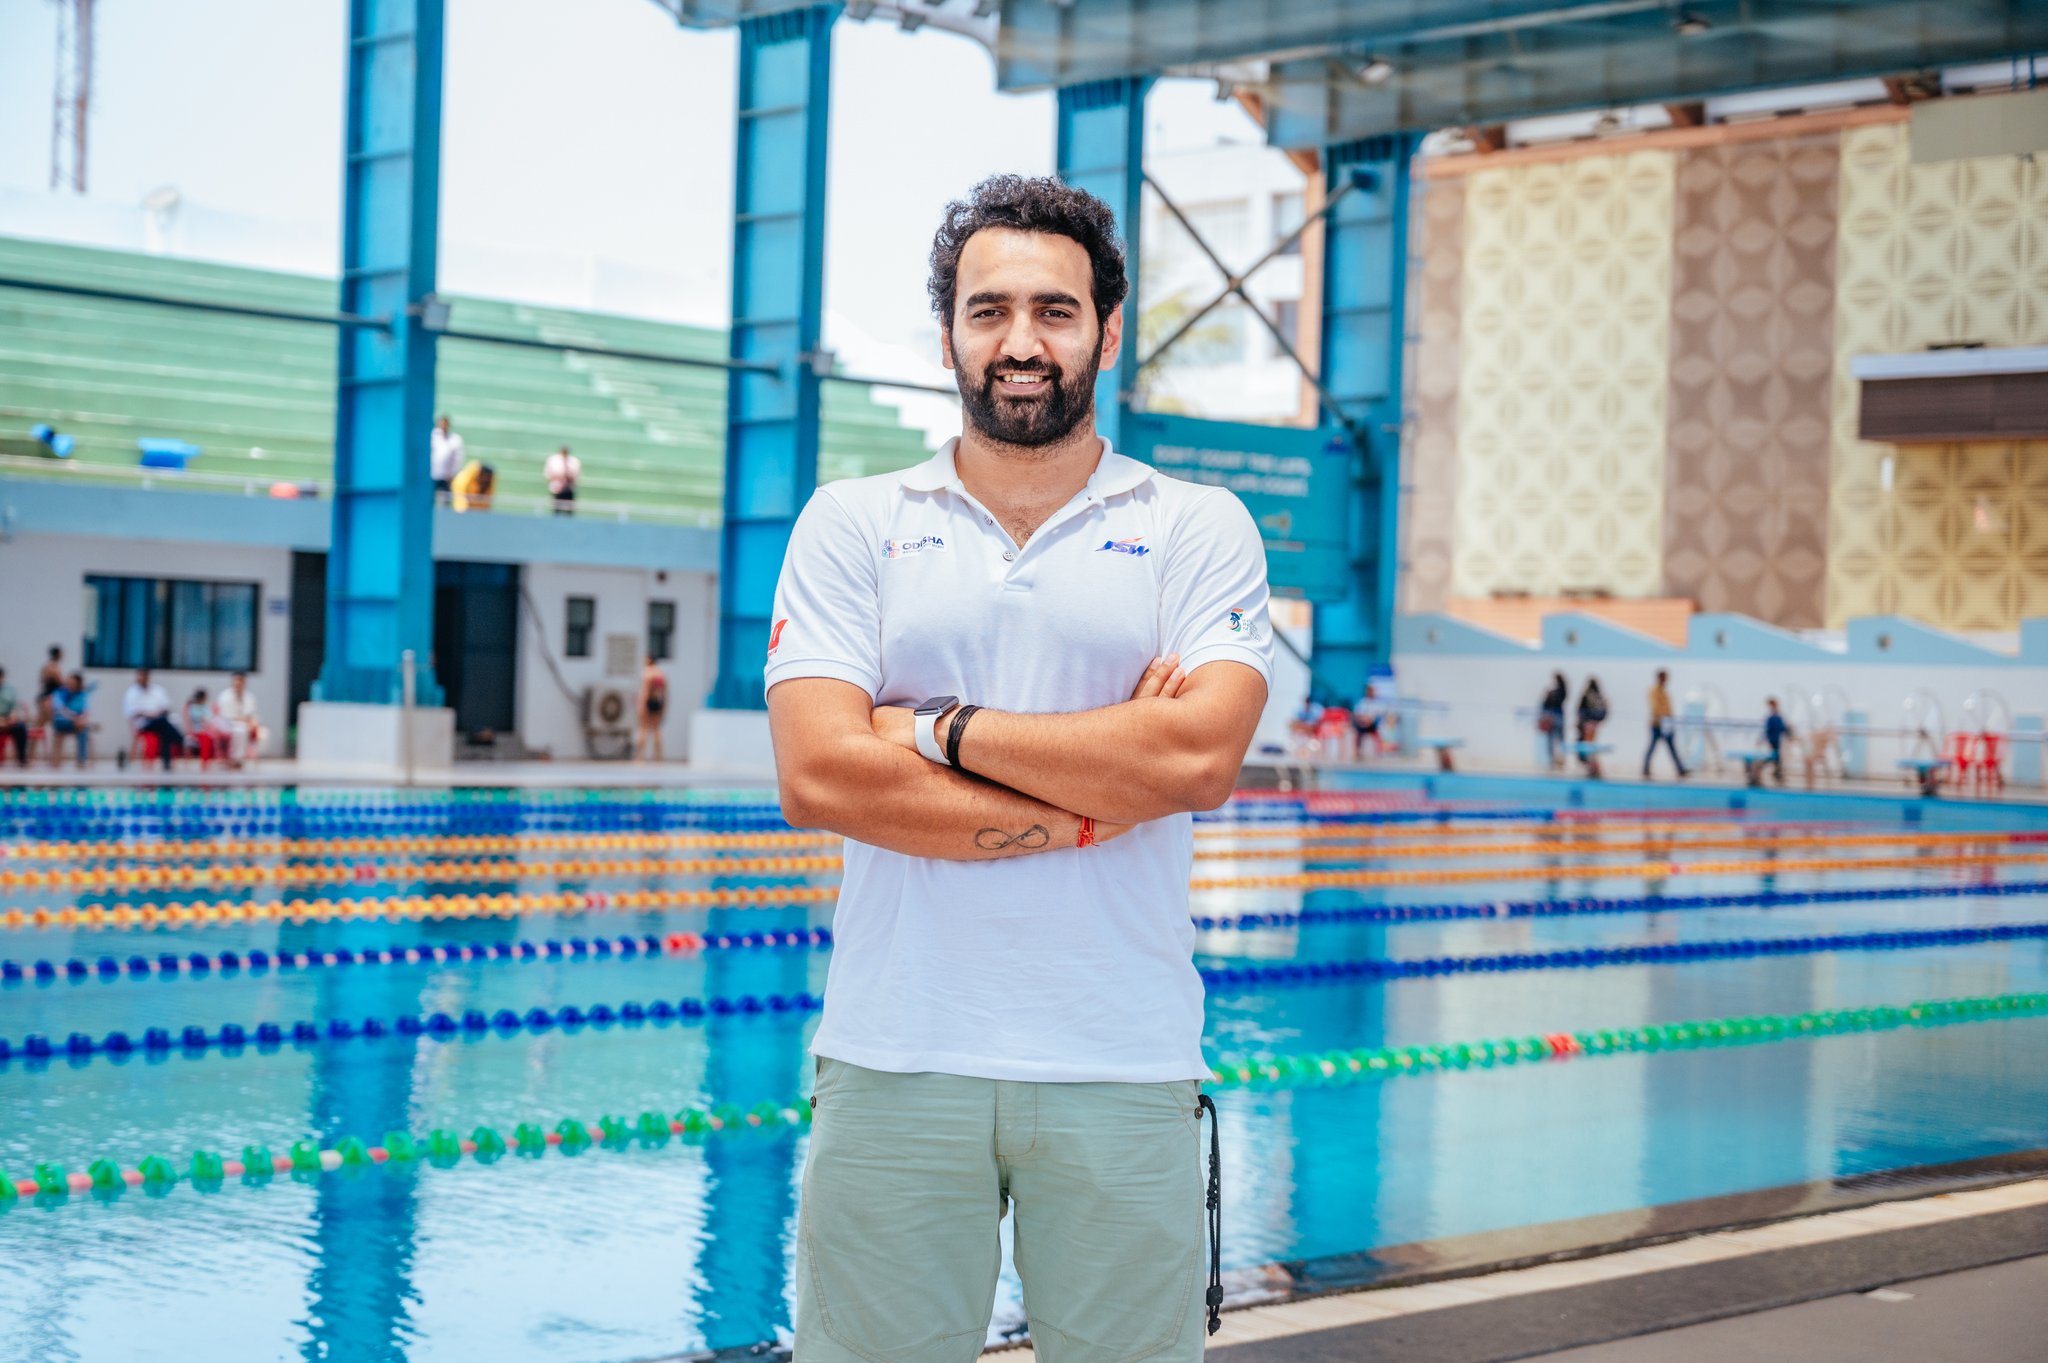 Swimmer Sandeep Sejwal who is the cousin of Siddhant and Sameer, who took part in the Games (Source: Twitter)